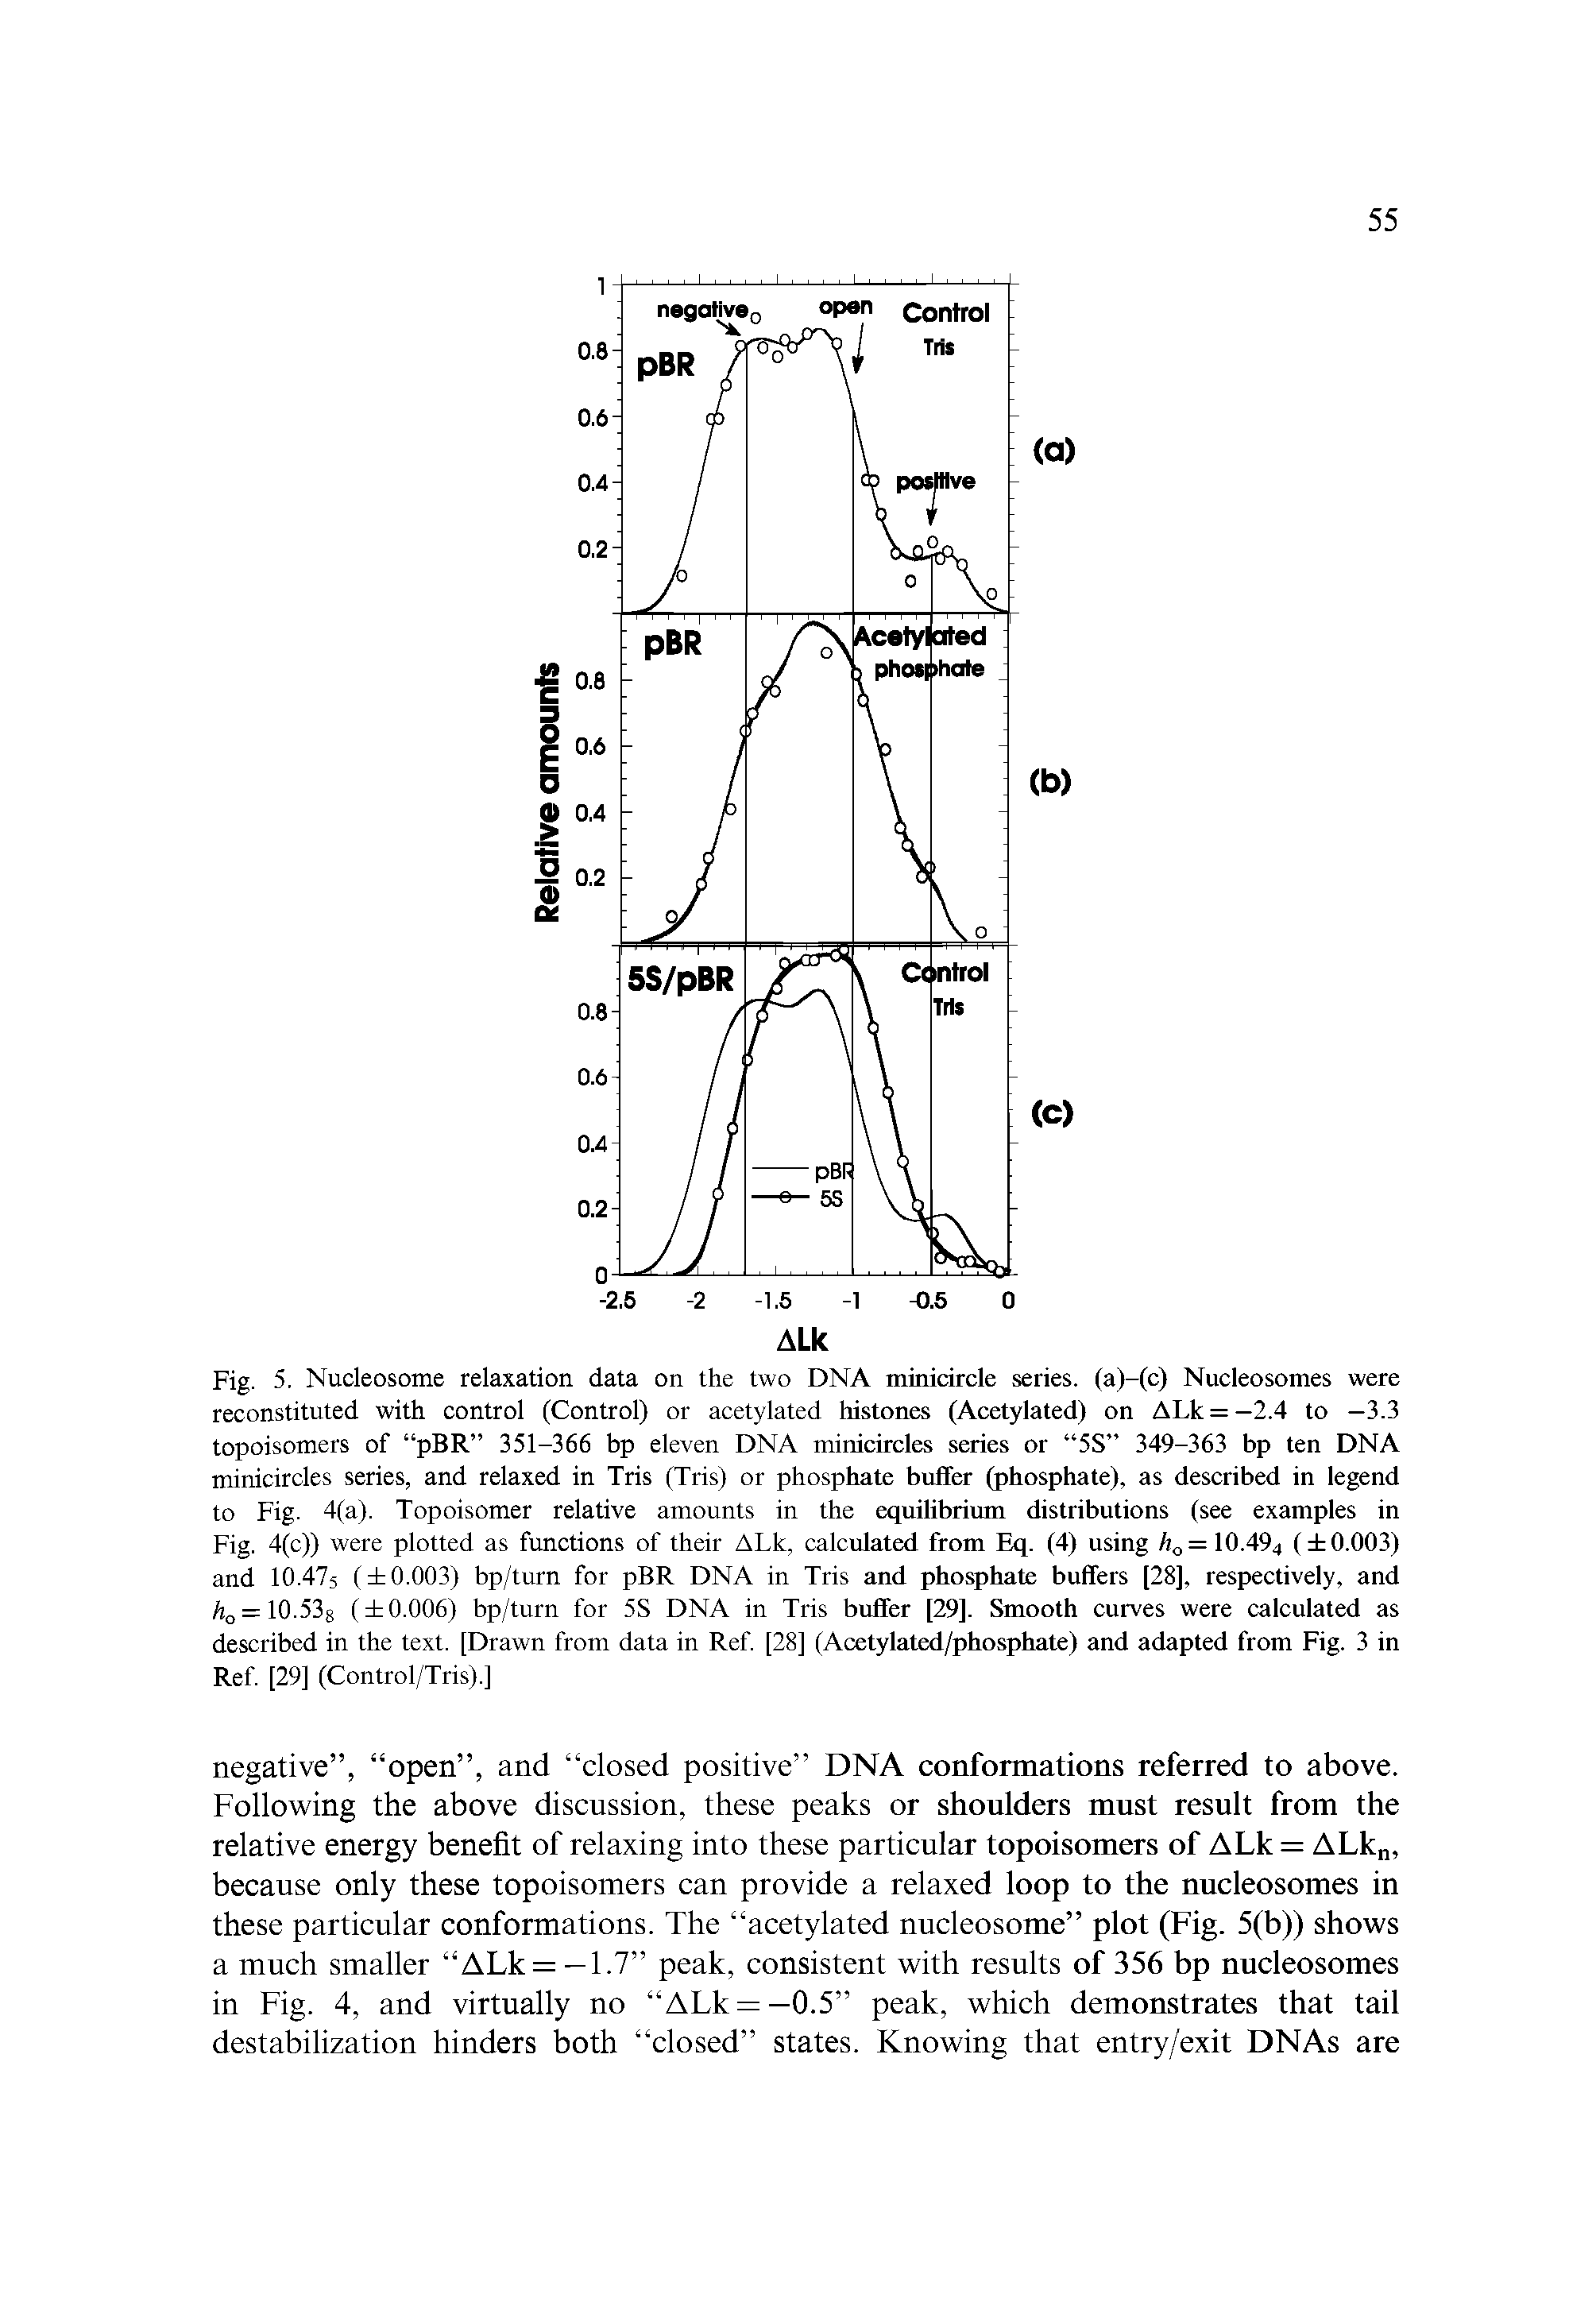 Fig. 5, Nucleosome relaxation data on the two DNA minicircle series, (a)-(c) Nucleosomes were reconstituted with control (Control) or acetylated histones (Acetylated) on ALk = —2.4 to —3.3 topoisomers of pBR 351-366 bp eleven DNA minicircles series or 5S 349-363 bp ten DNA minicircles series, and relaxed in Tris (Tris) or phosphate buffer (phosphate), as described in legend to Fig. 4(a). Topoisomer relative amounts in the equilibrium distributions (see examples in Fig. 4(c)) were plotted as functions of their ALk, calculated from Eq. (4) using h = QA94 ( 0.003) and 10.47s ( 0.003) bp/turn for pBR DNA in Tris and phosphate buffers [28], respectively, and 0 = 10.538 ( 0.006) bp/turn for 5S DNA in Tris buffer [29]. Smooth curves were calculated as described in the text. [Drawn from data in Ref [28] (Acetylated/phosphate) and adapted from Fig. 3 in Ref [29] (Control/Tris).]...